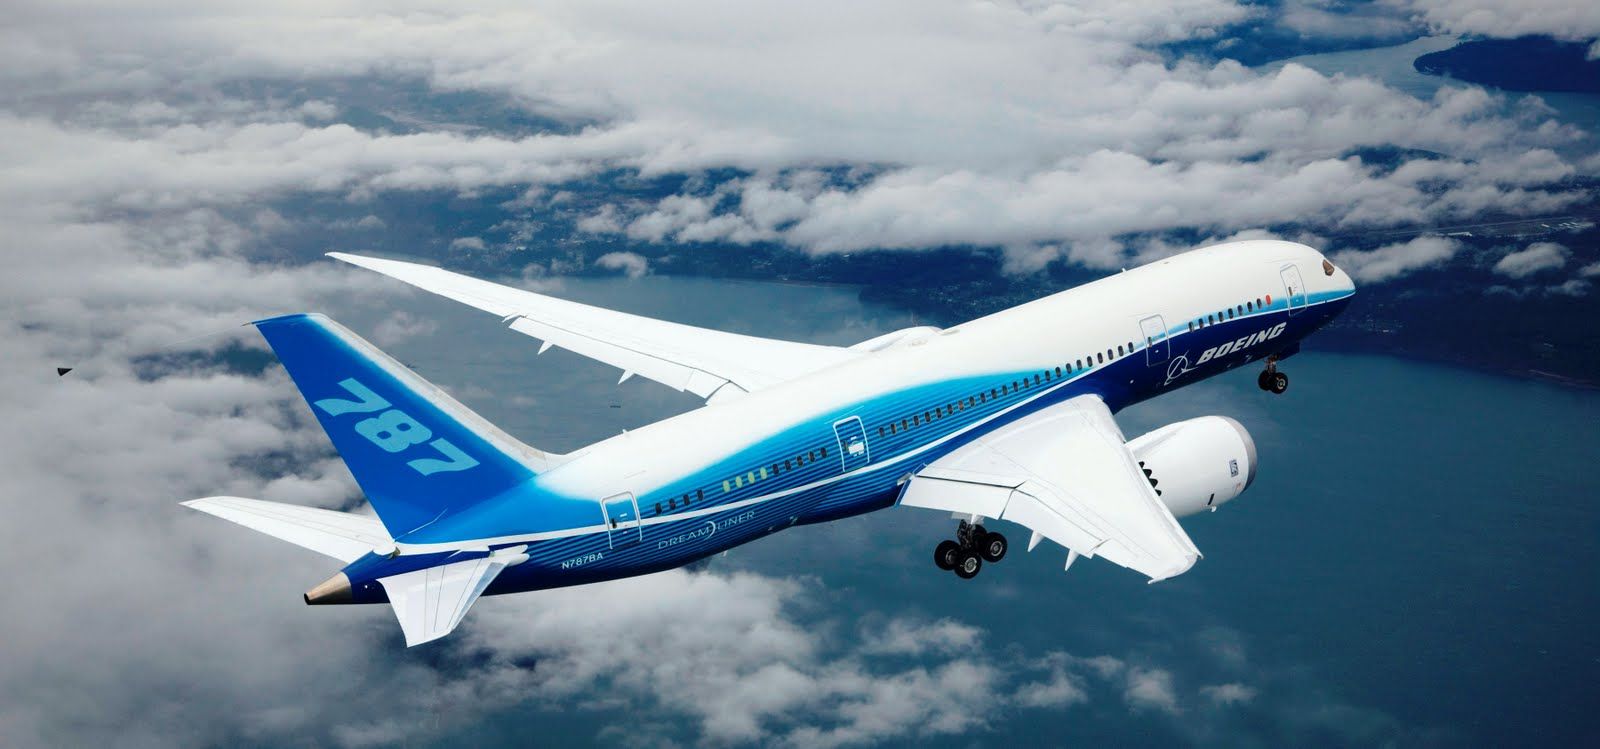 Vehicles For Boeing Wallpaper Widescreen